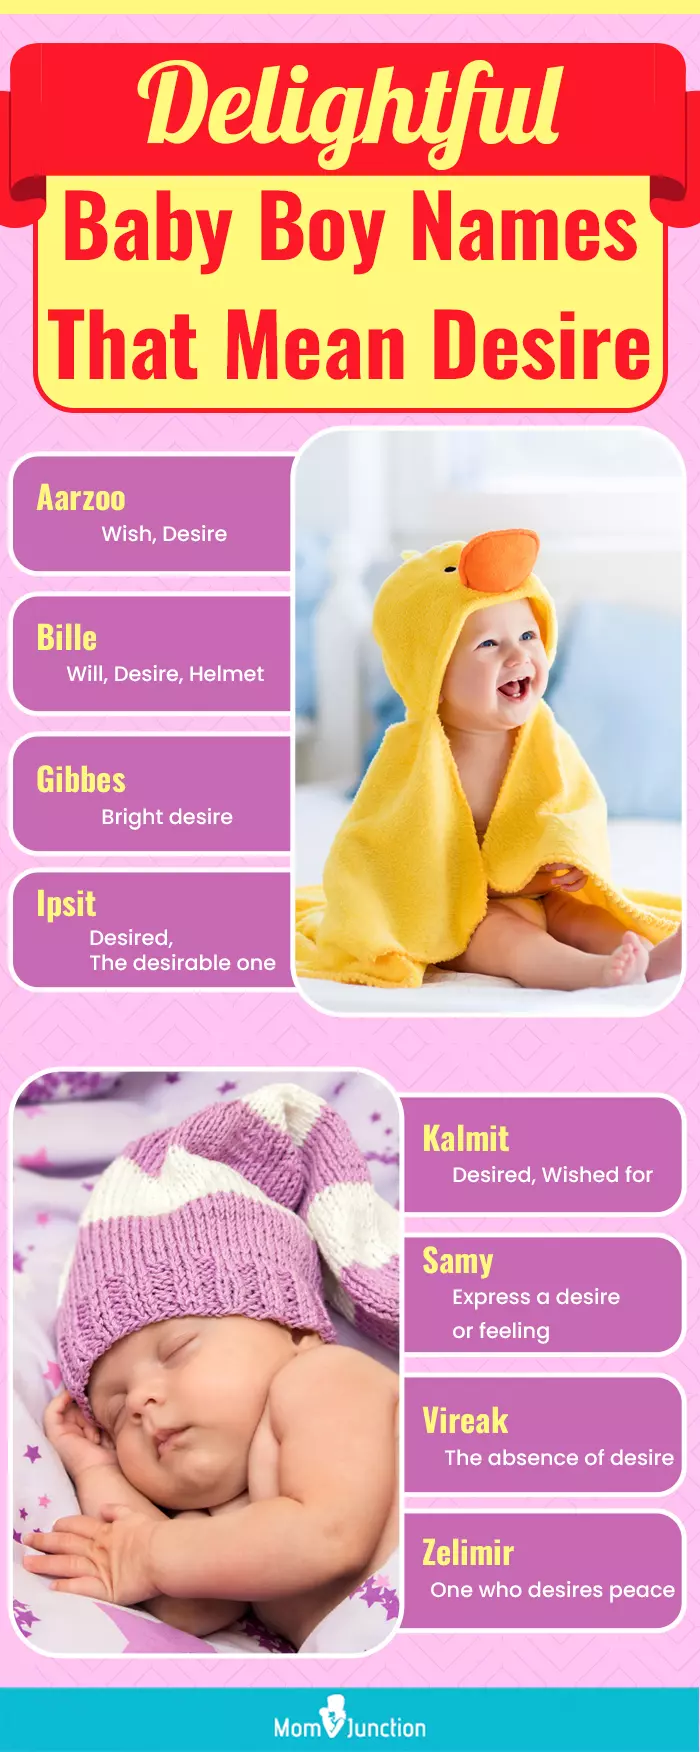 delightful baby boy names that mean desire (infographic)